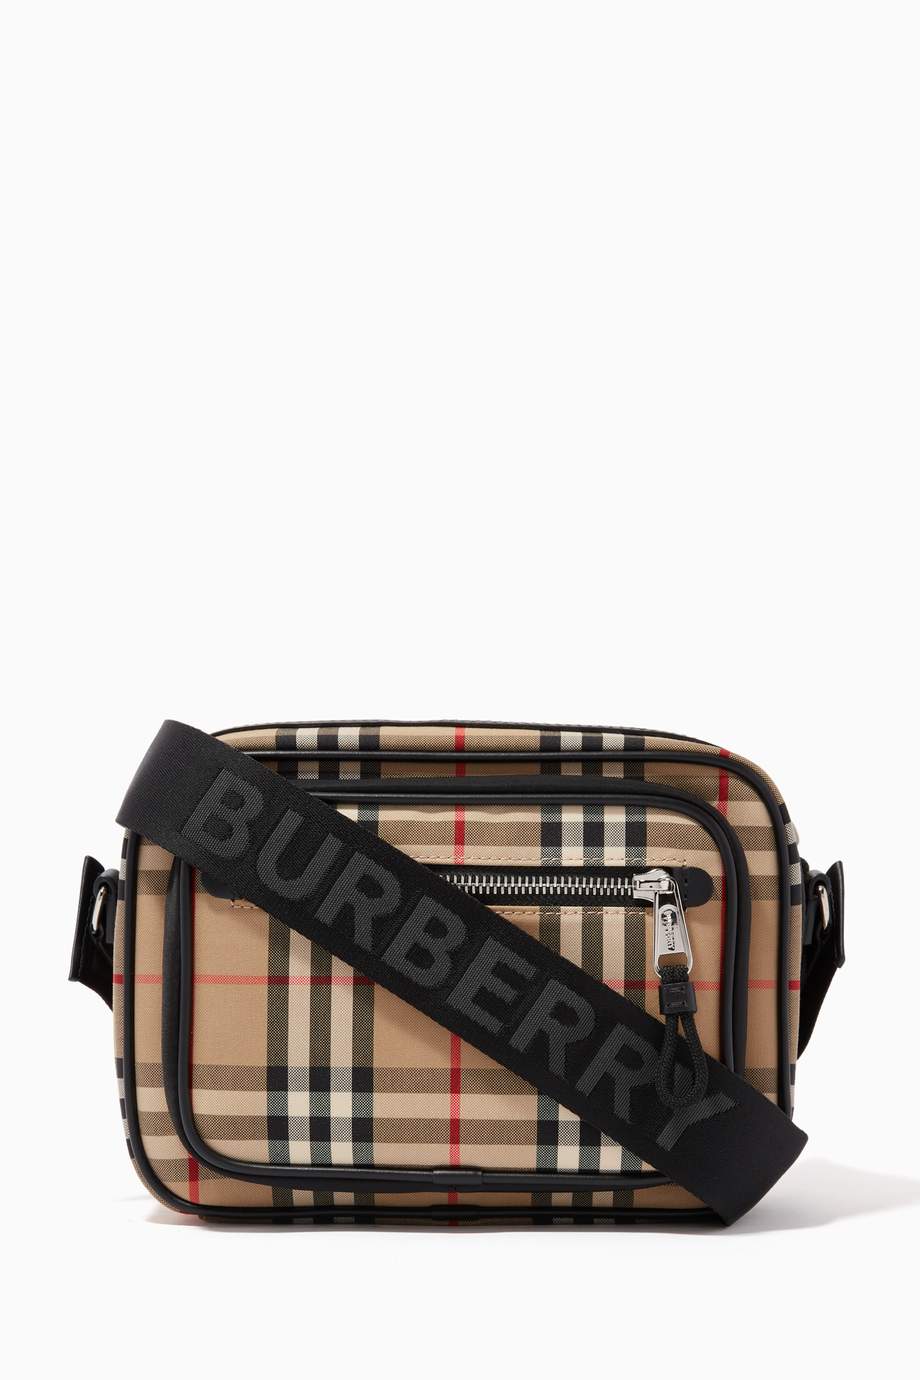 Shop Burberry Neutral Crossbody Bag in Vintage Check & Leather for Men ...